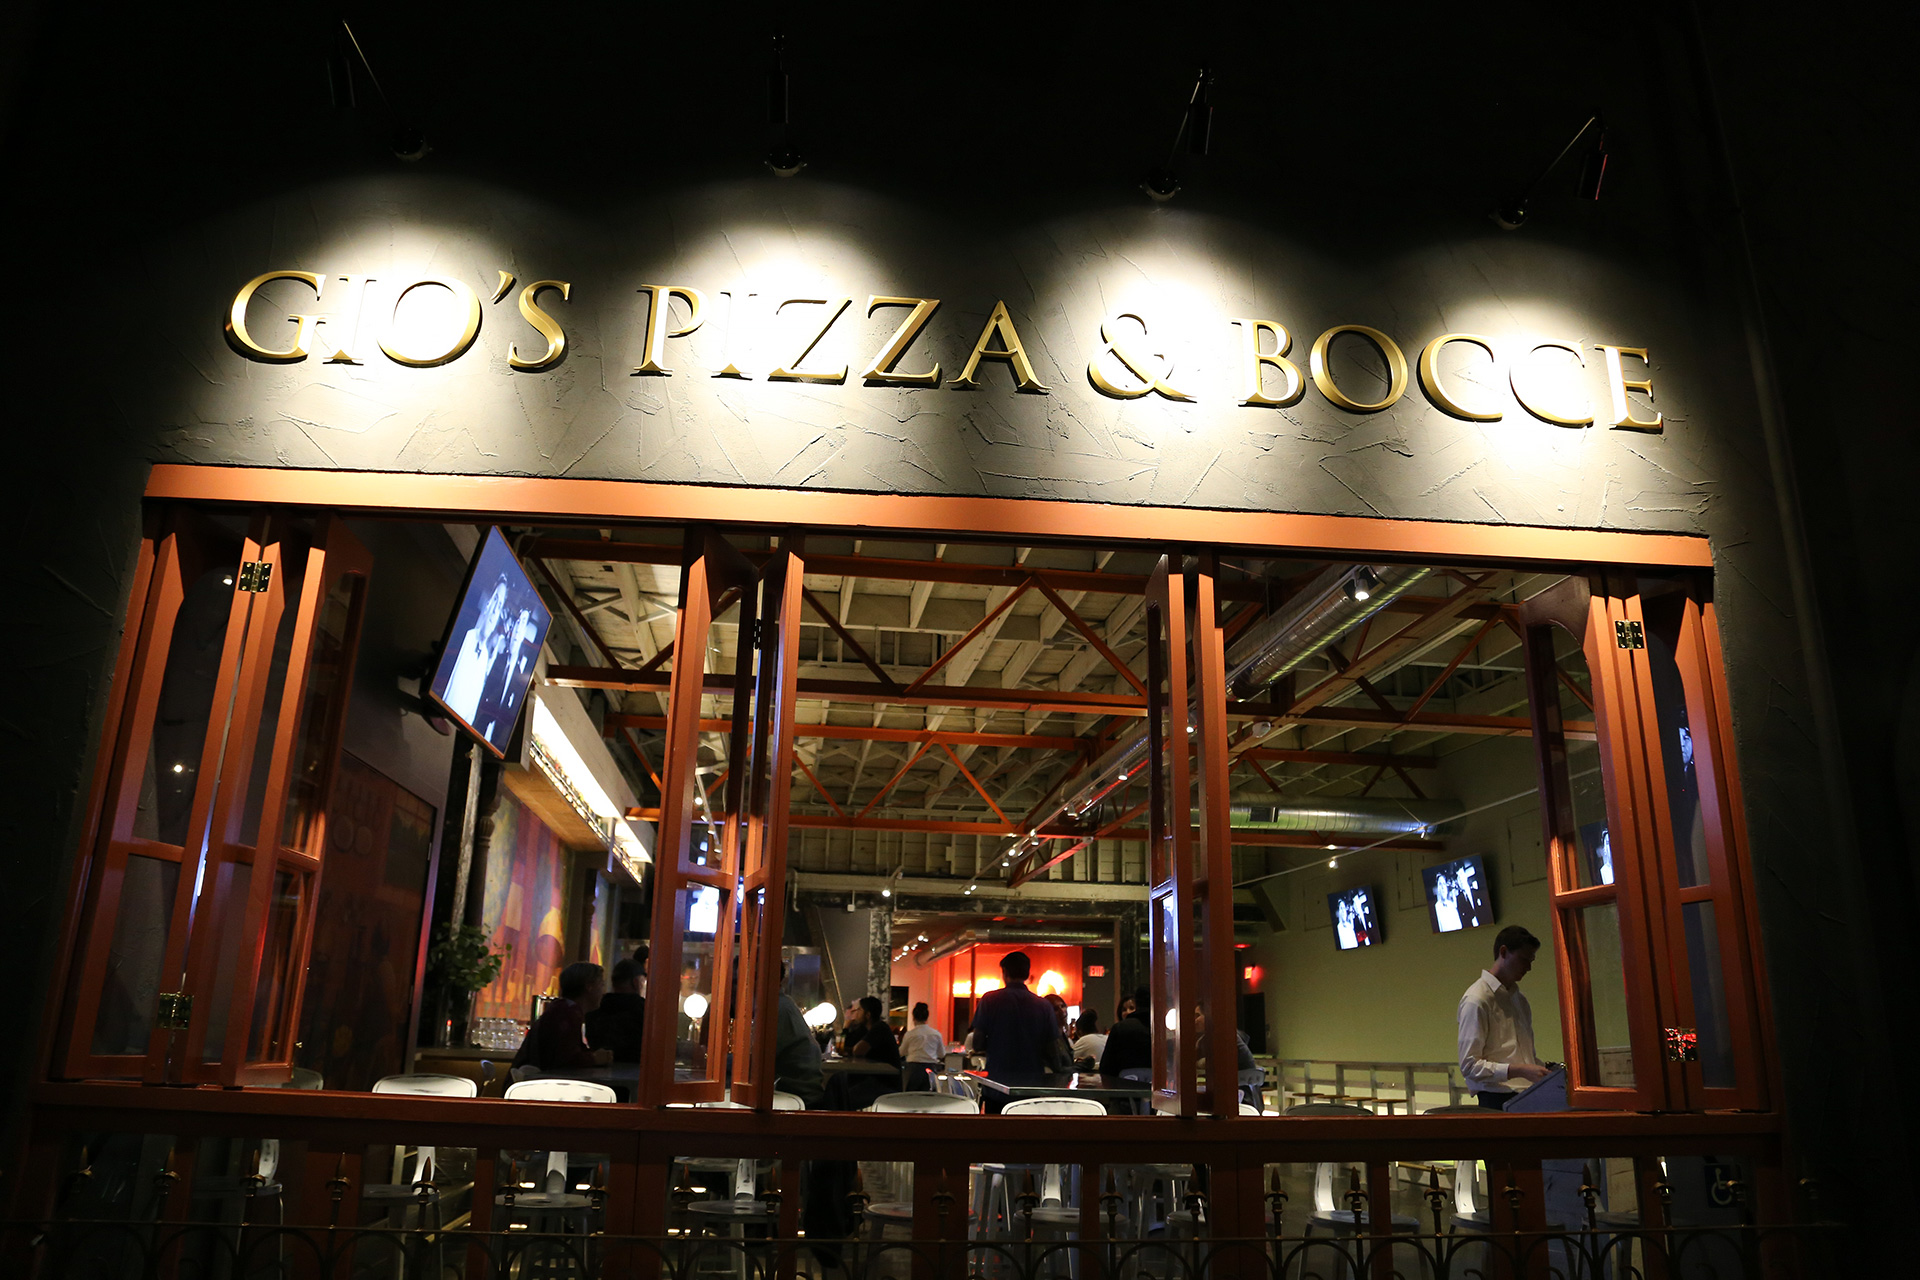 Gio's Pizza & Bocce exterior at night.